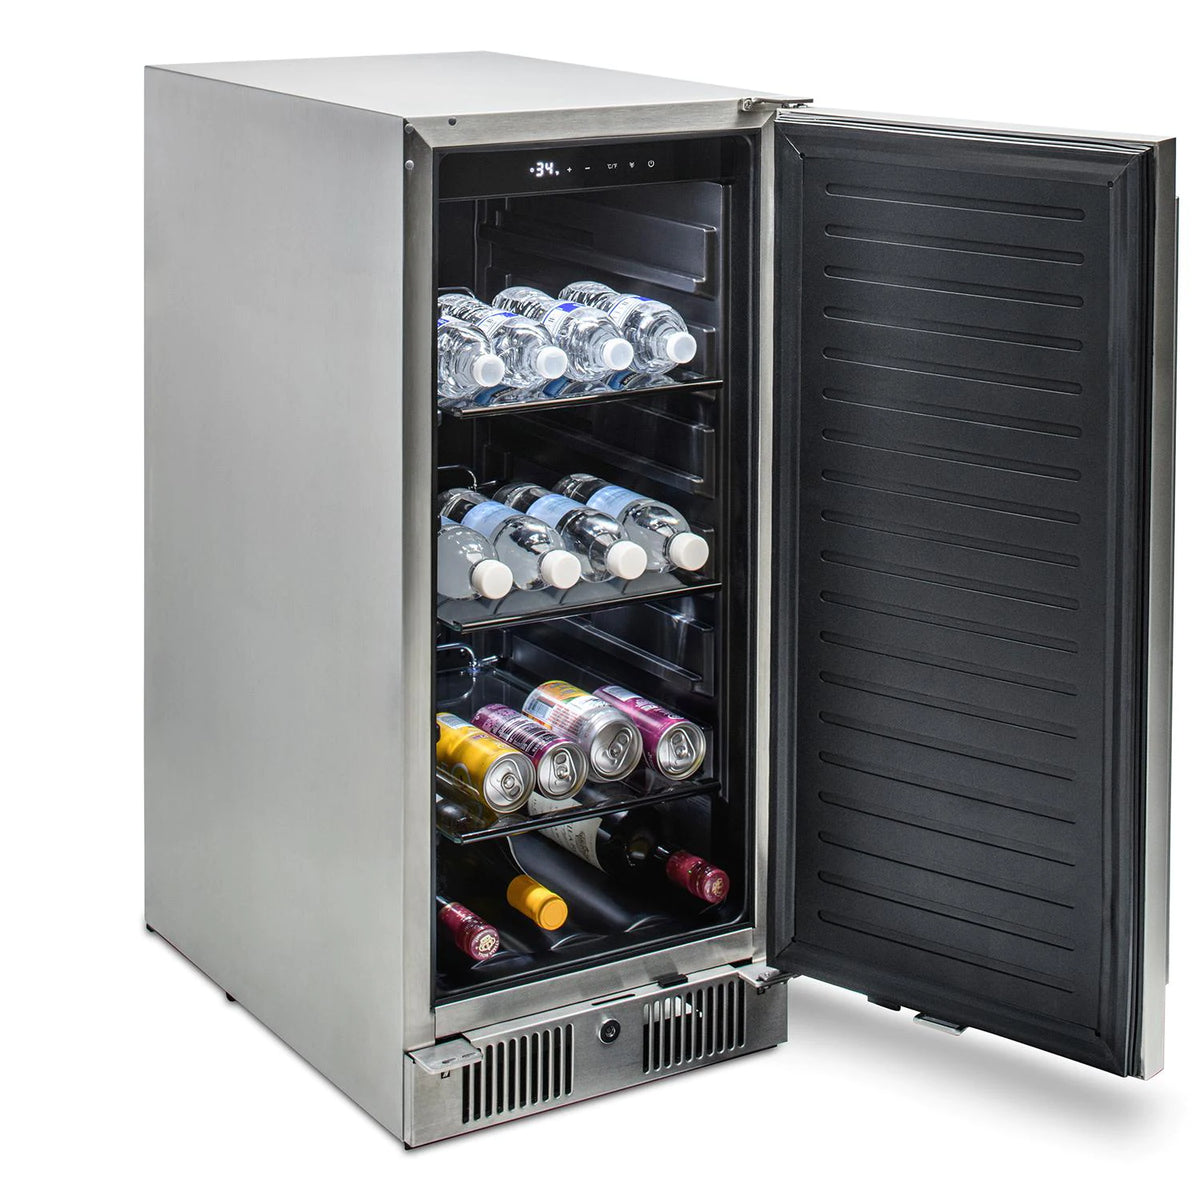 Blaze 15 Inch Outdoor Refrigerator Left Angle View with Drinks